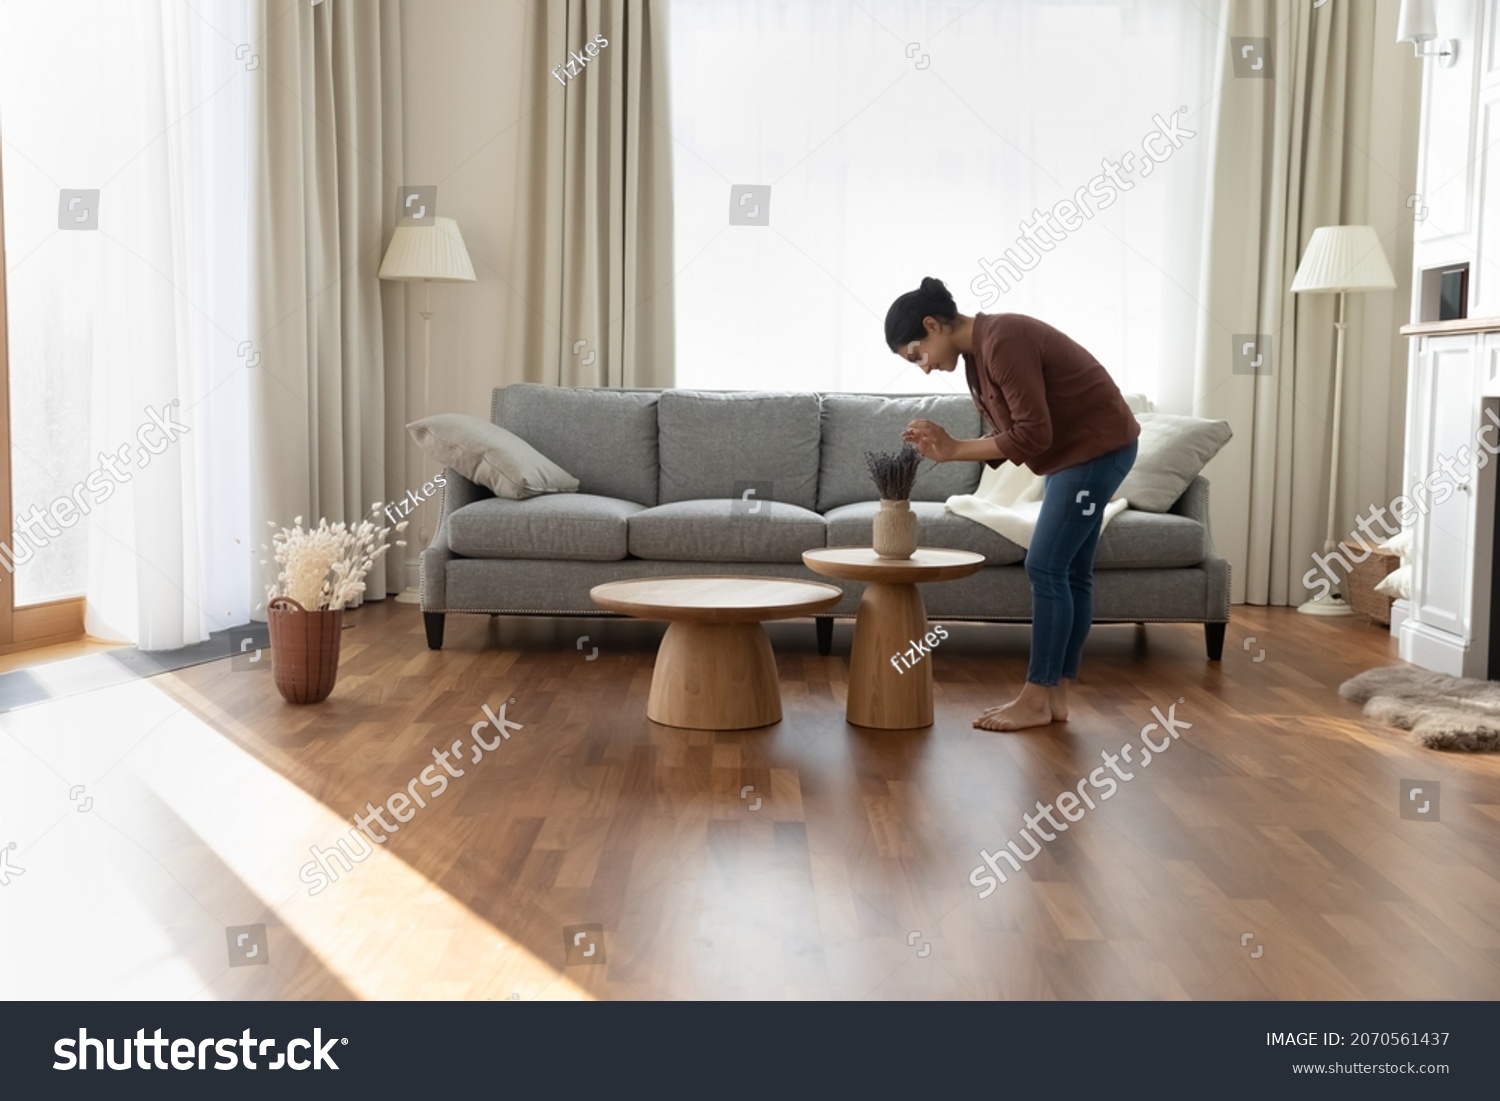 Full length of young Indian ethnicity housewife standing in modern spacious living room create cosiness at home, arranging flowers bunch in vase. Housework routine, interior designer workflow concept #2070561437